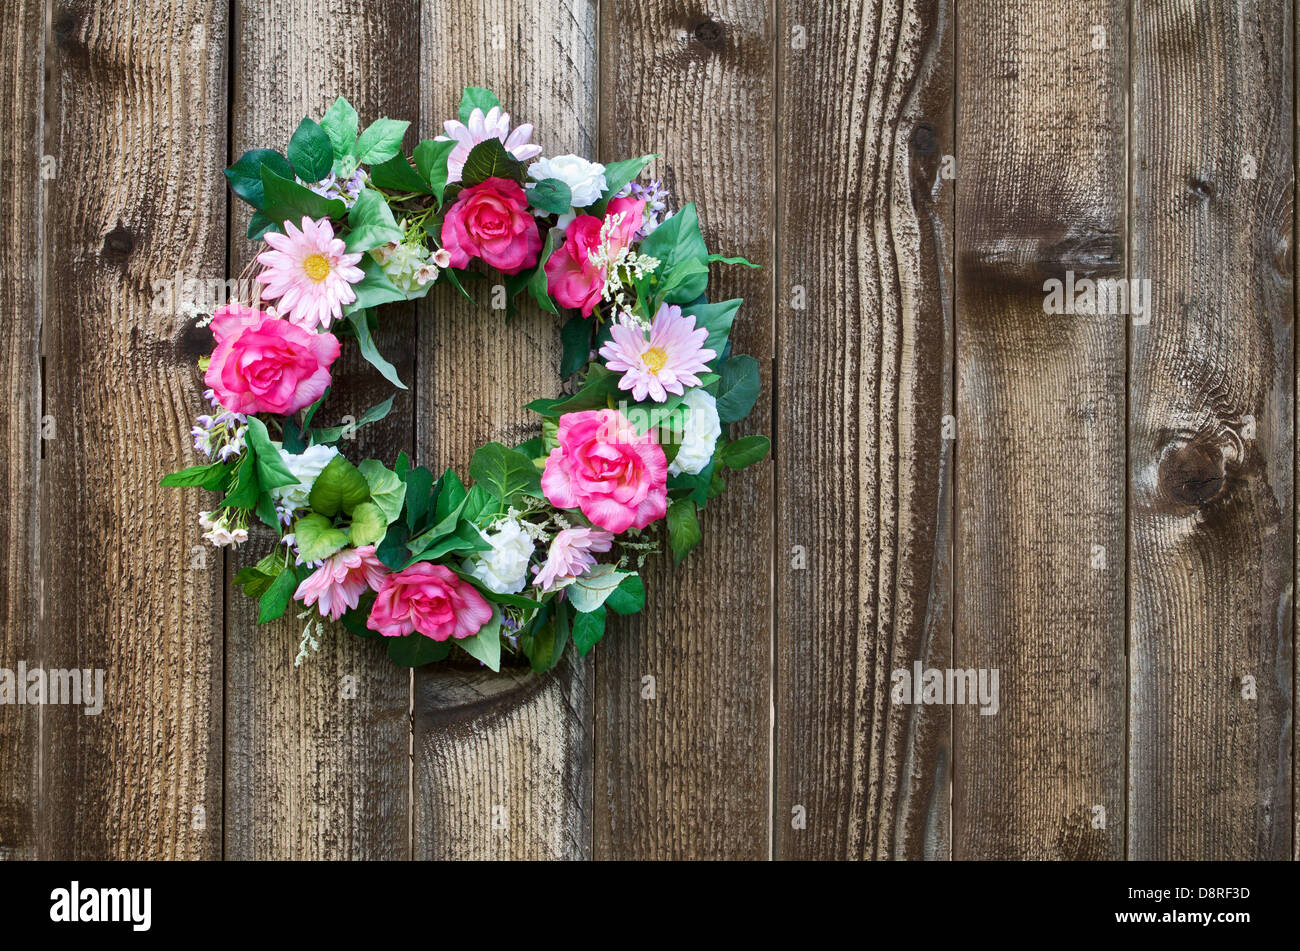 Flower wreath hanging on rustic wooden fence Stock Photo